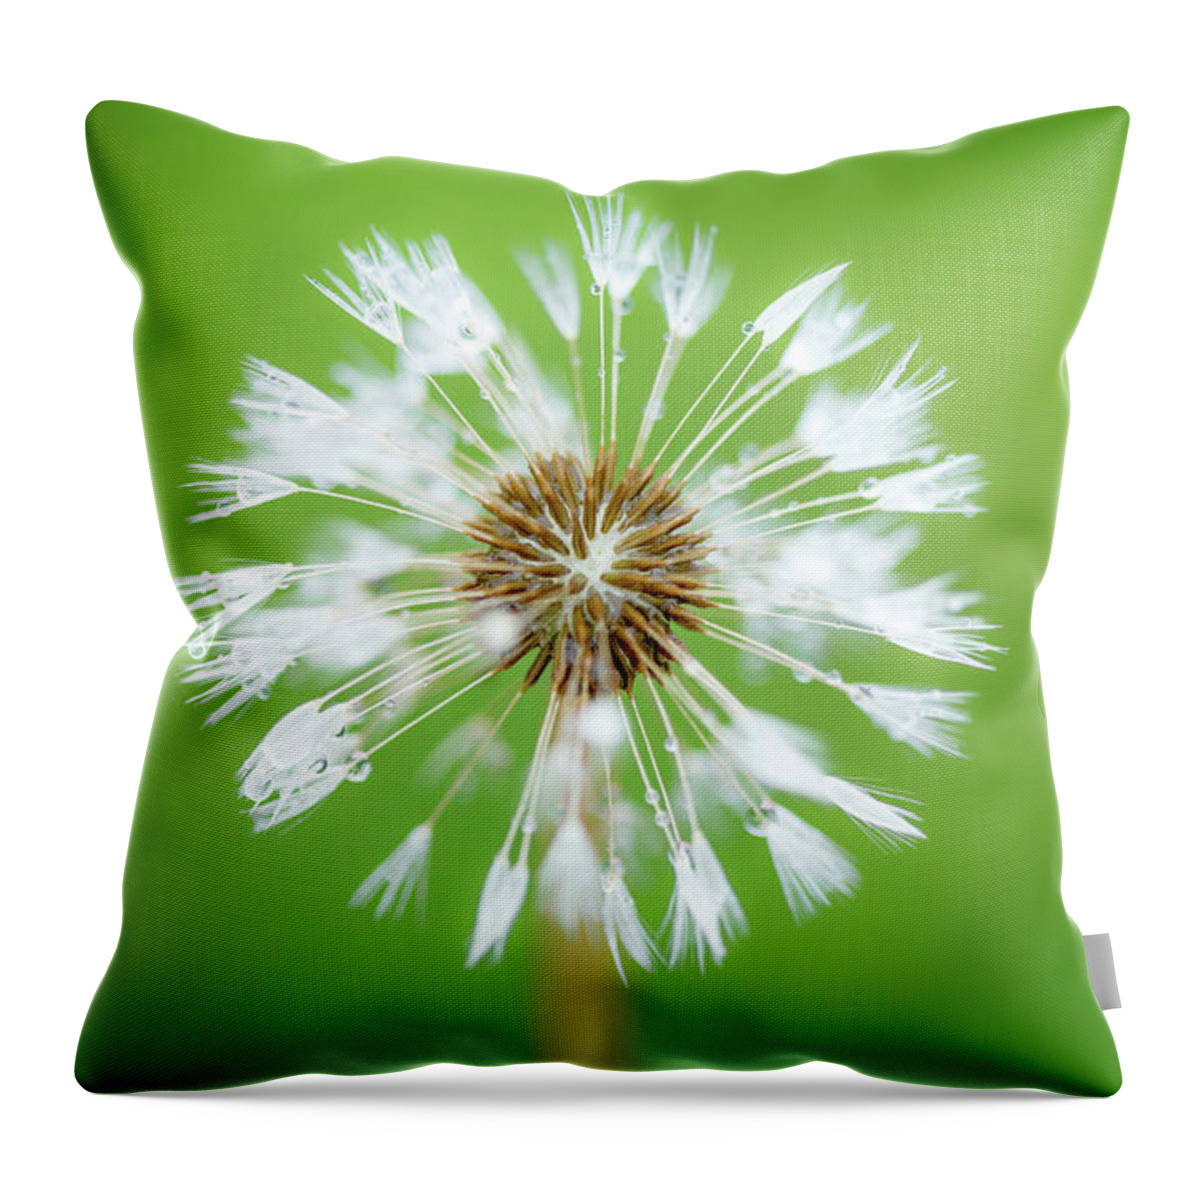 Abstract Throw Pillow featuring the photograph Make A Wish - on Green by Anita Nicholson